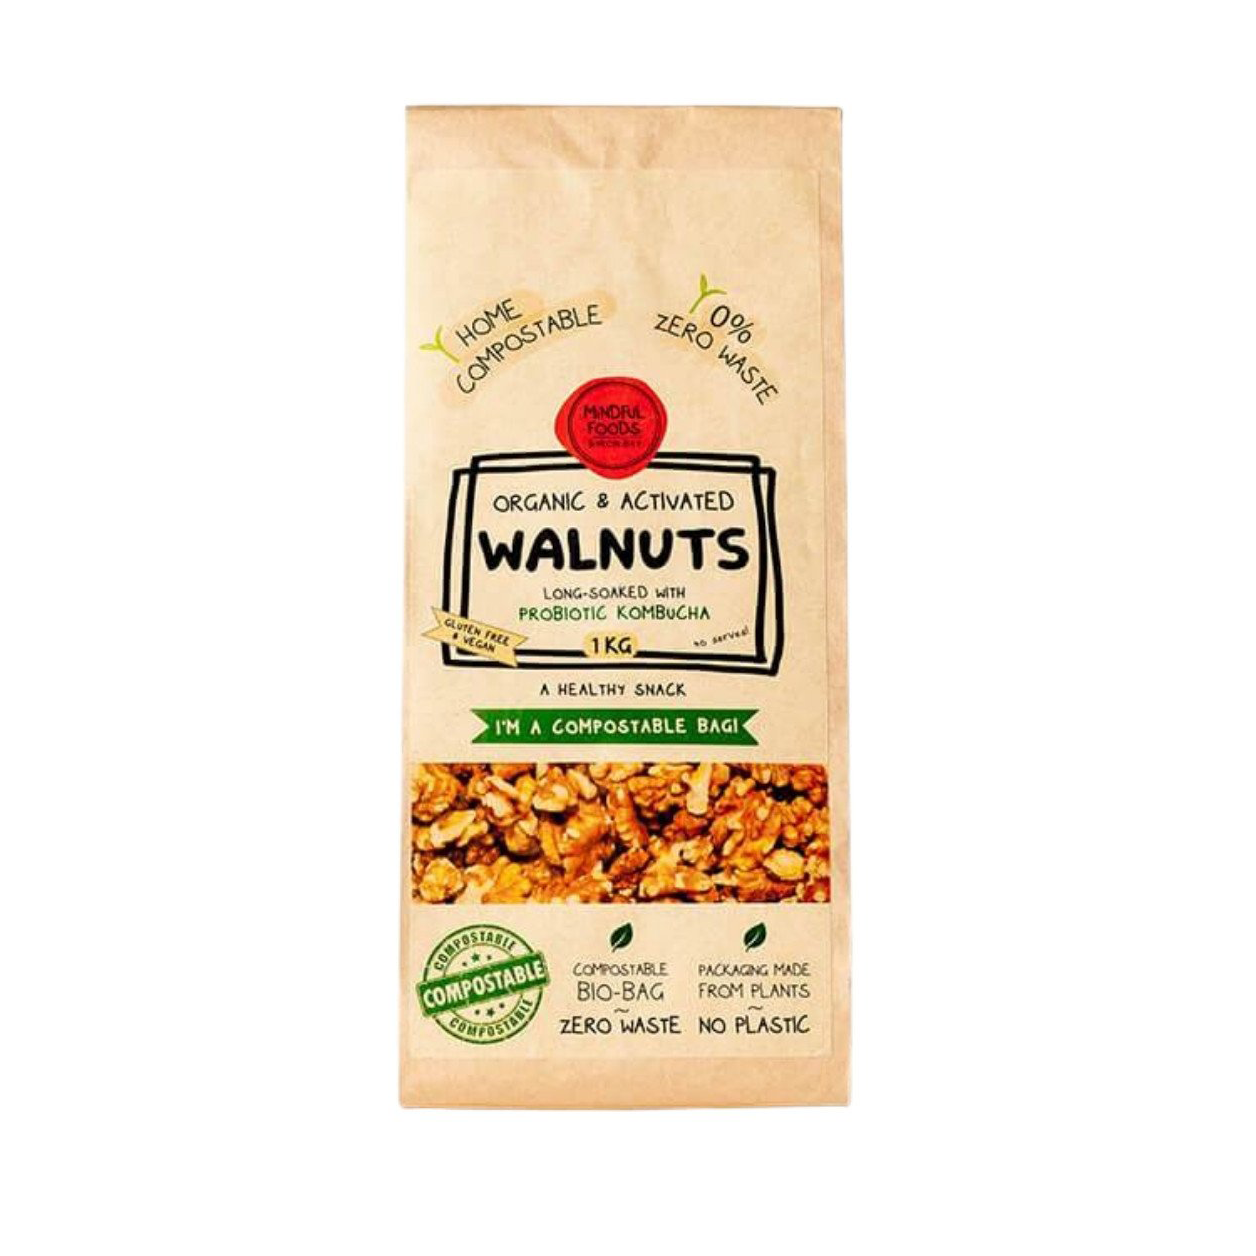 Mindful Foods Walnuts 200g, 400g Or 1kg, Organic & Activated